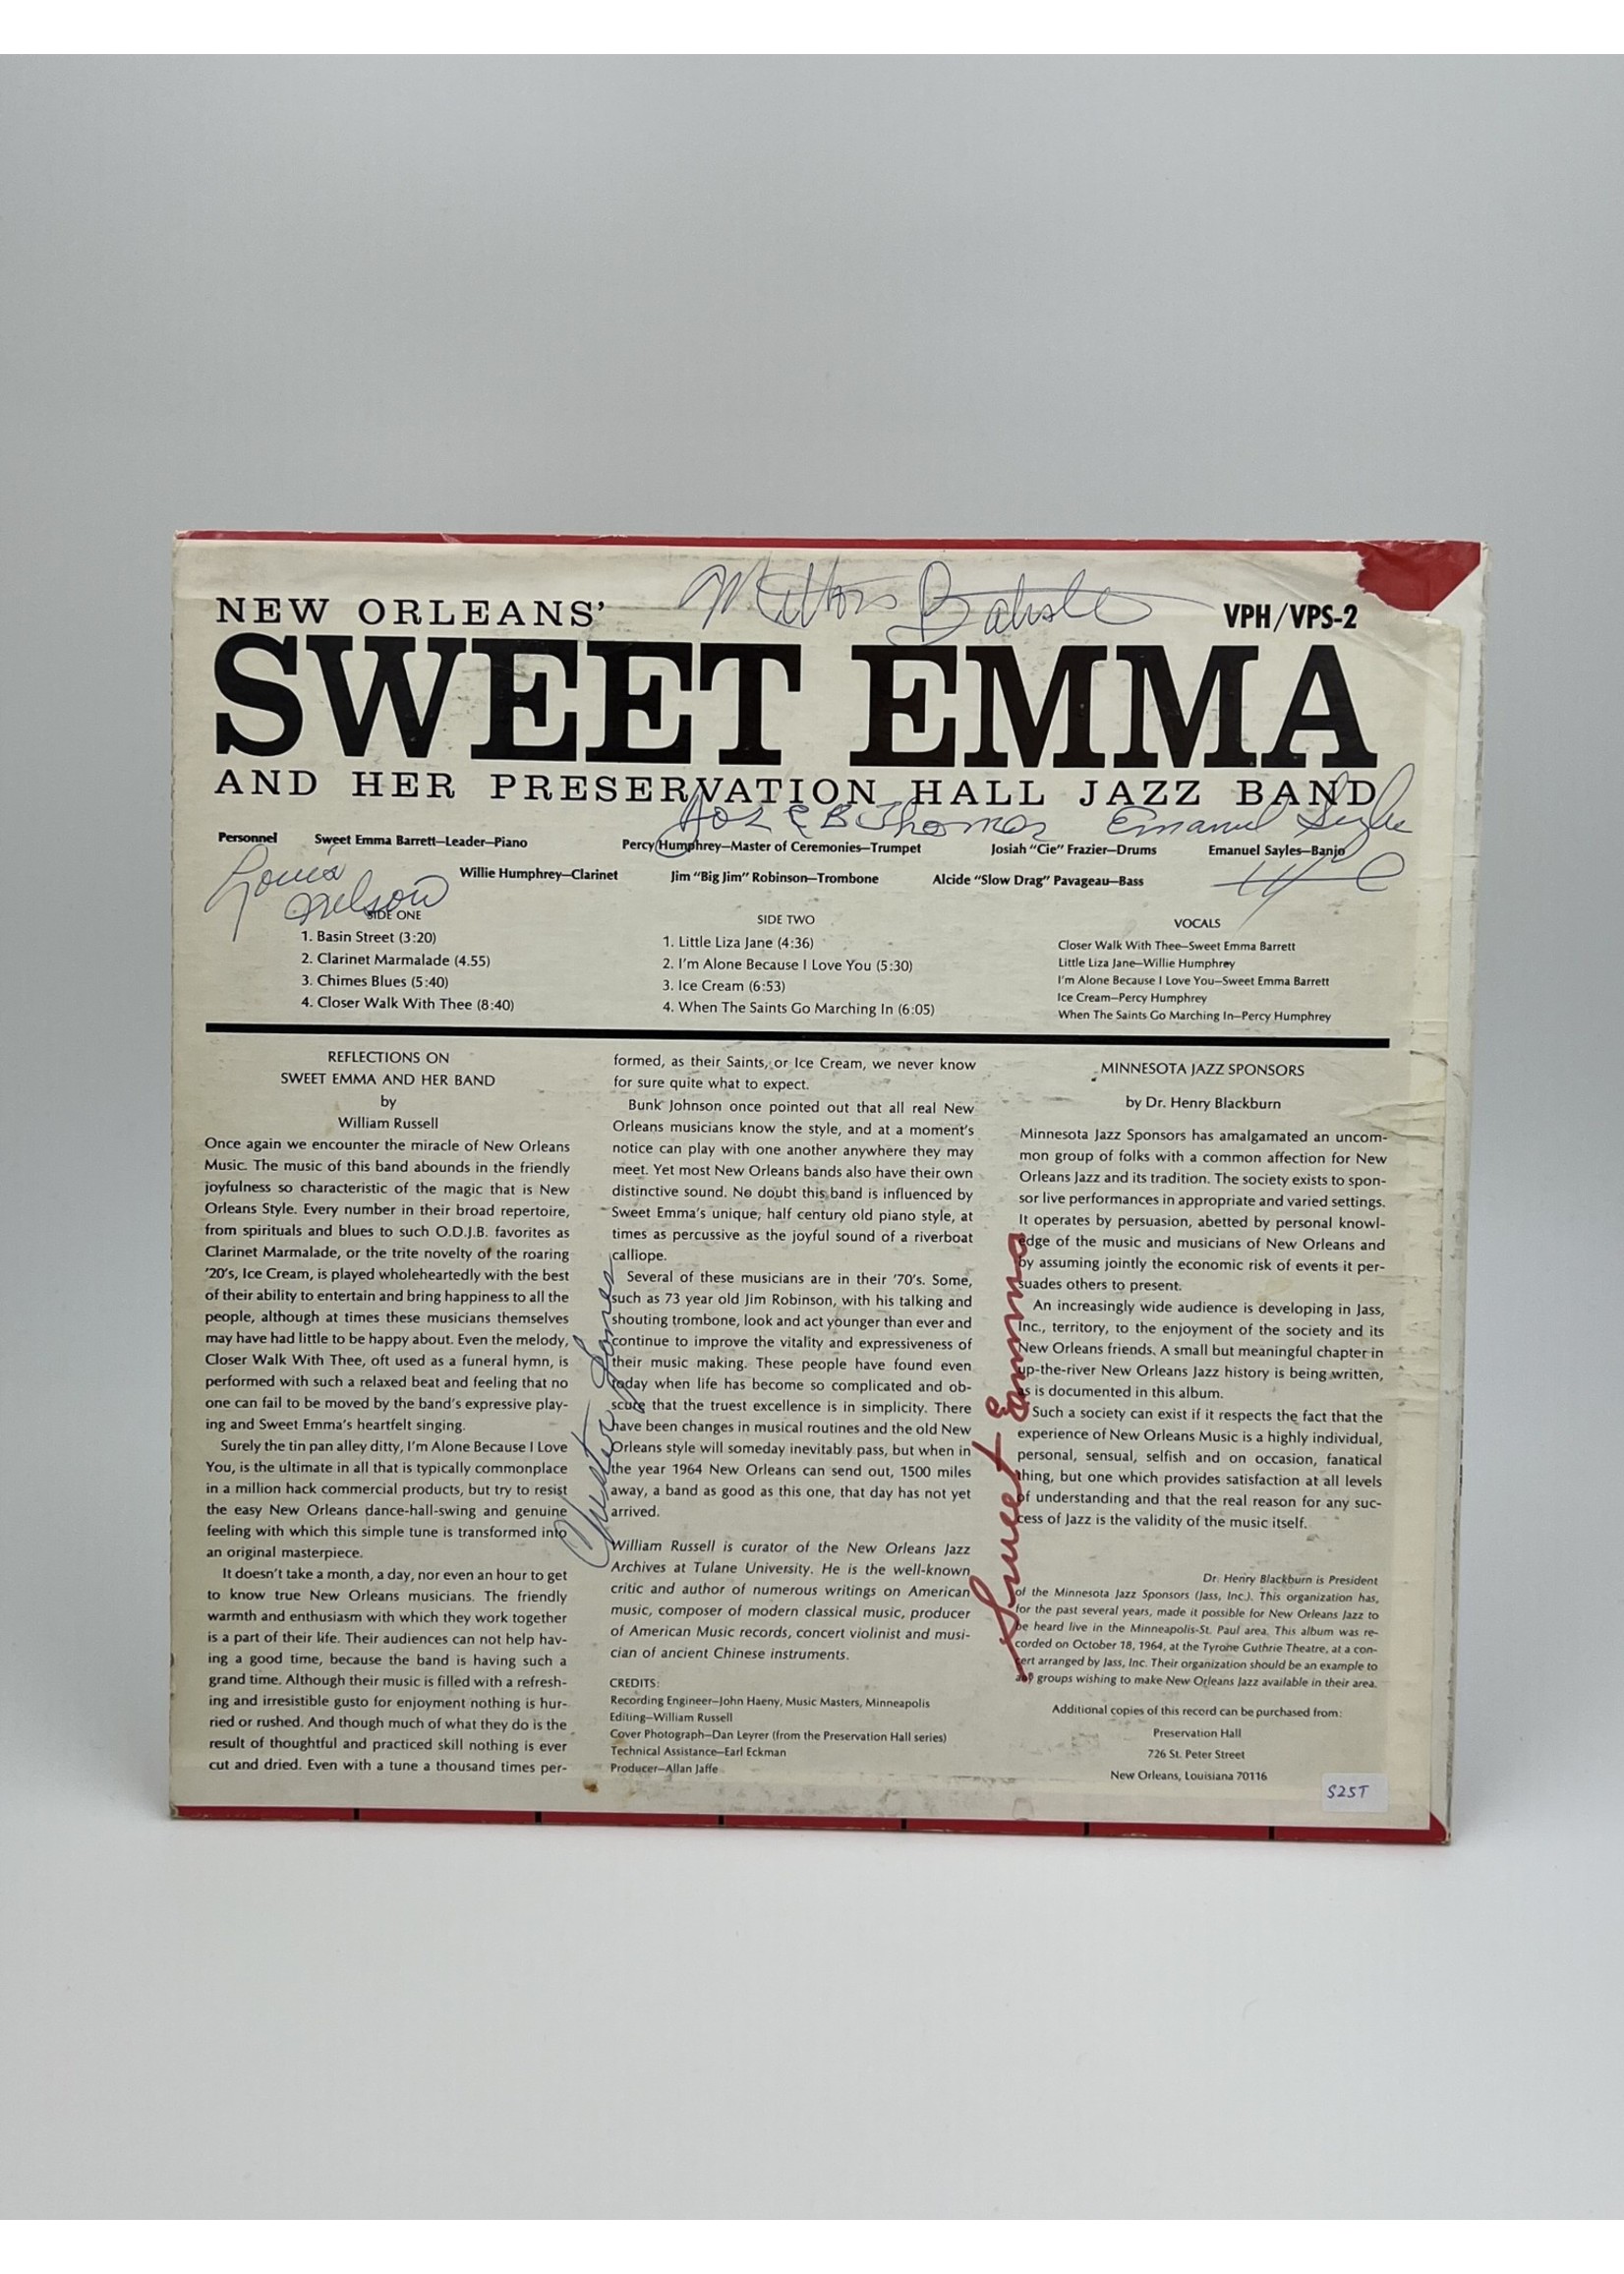 LP Sweet Emma And Her Preservation Hall Jazz Band LP Record